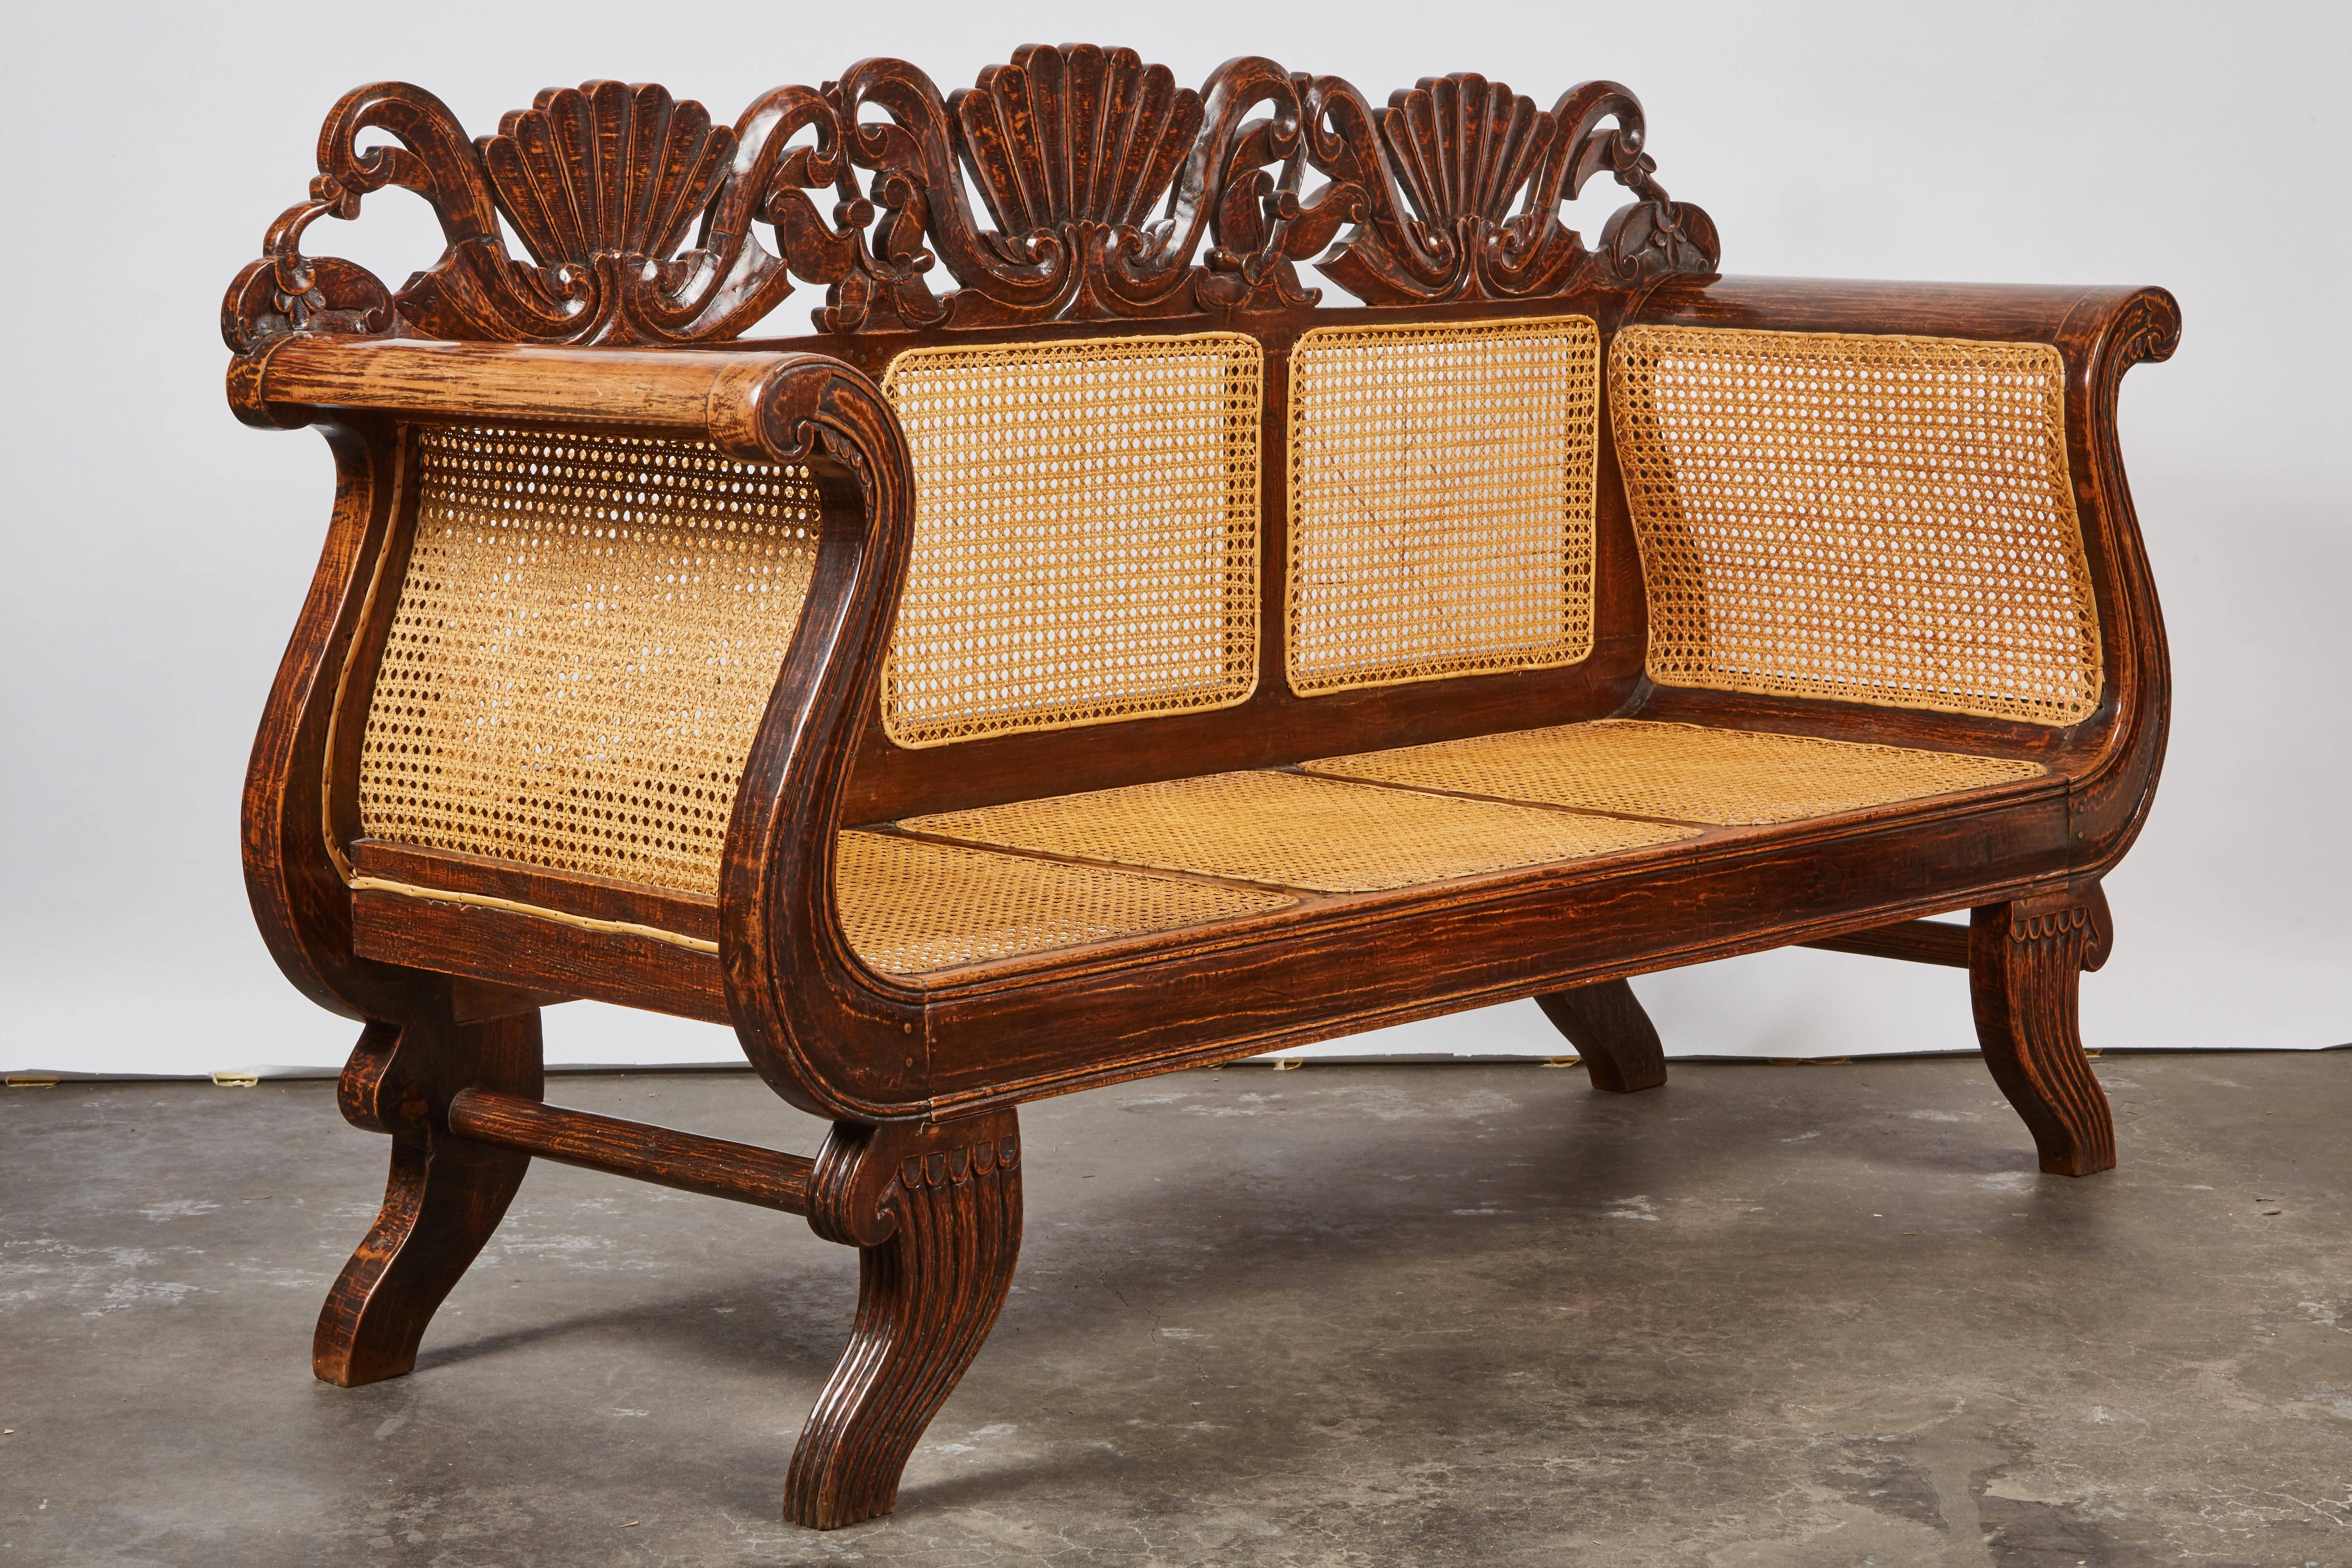 19th Century Indonesian Teak Settee with Carved Rattan/Wicker Back and Seat